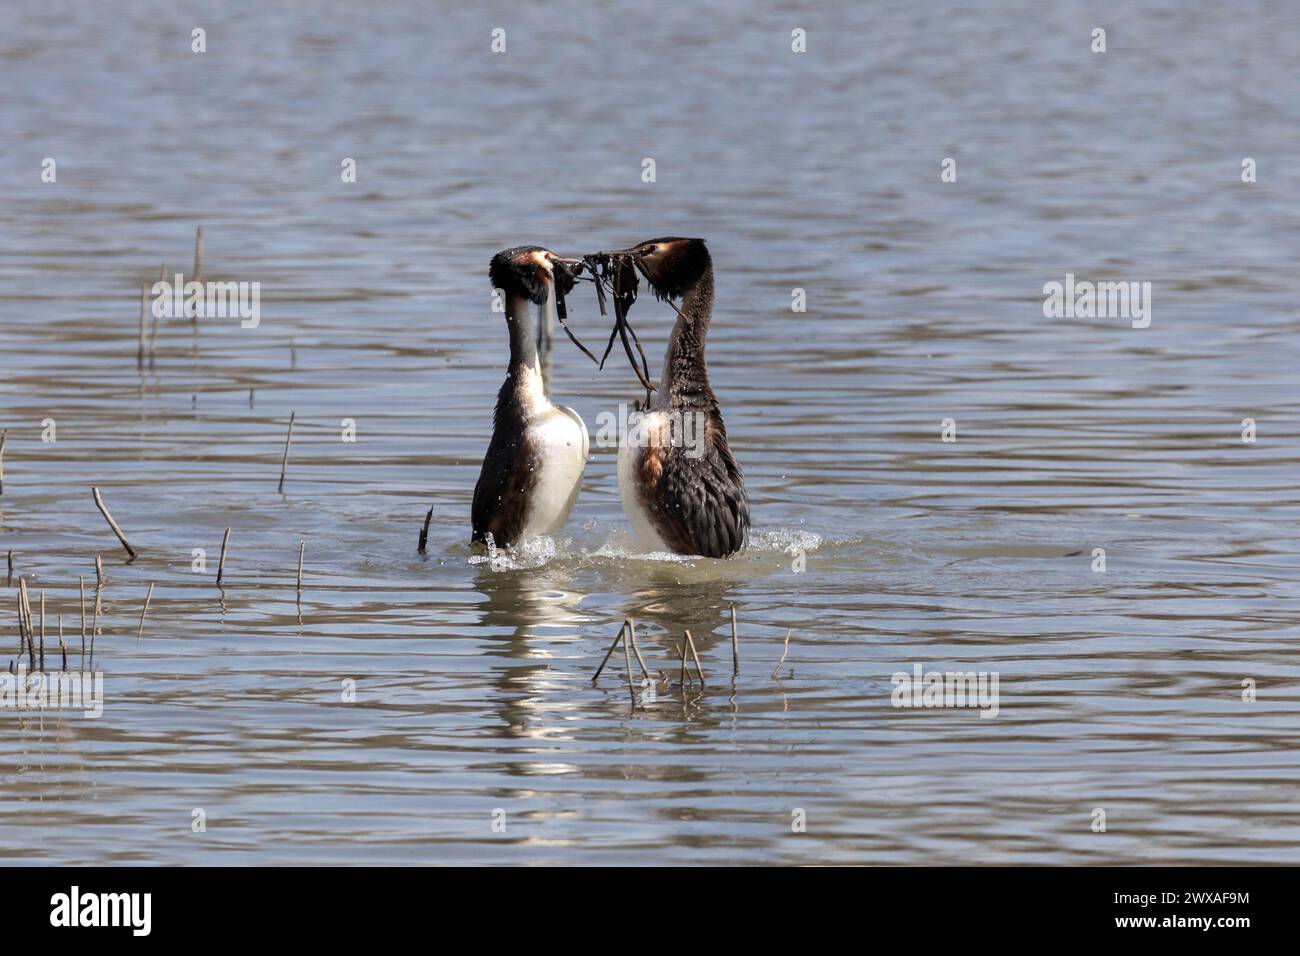 A couple of great grebes swim on the lake Stock Photo